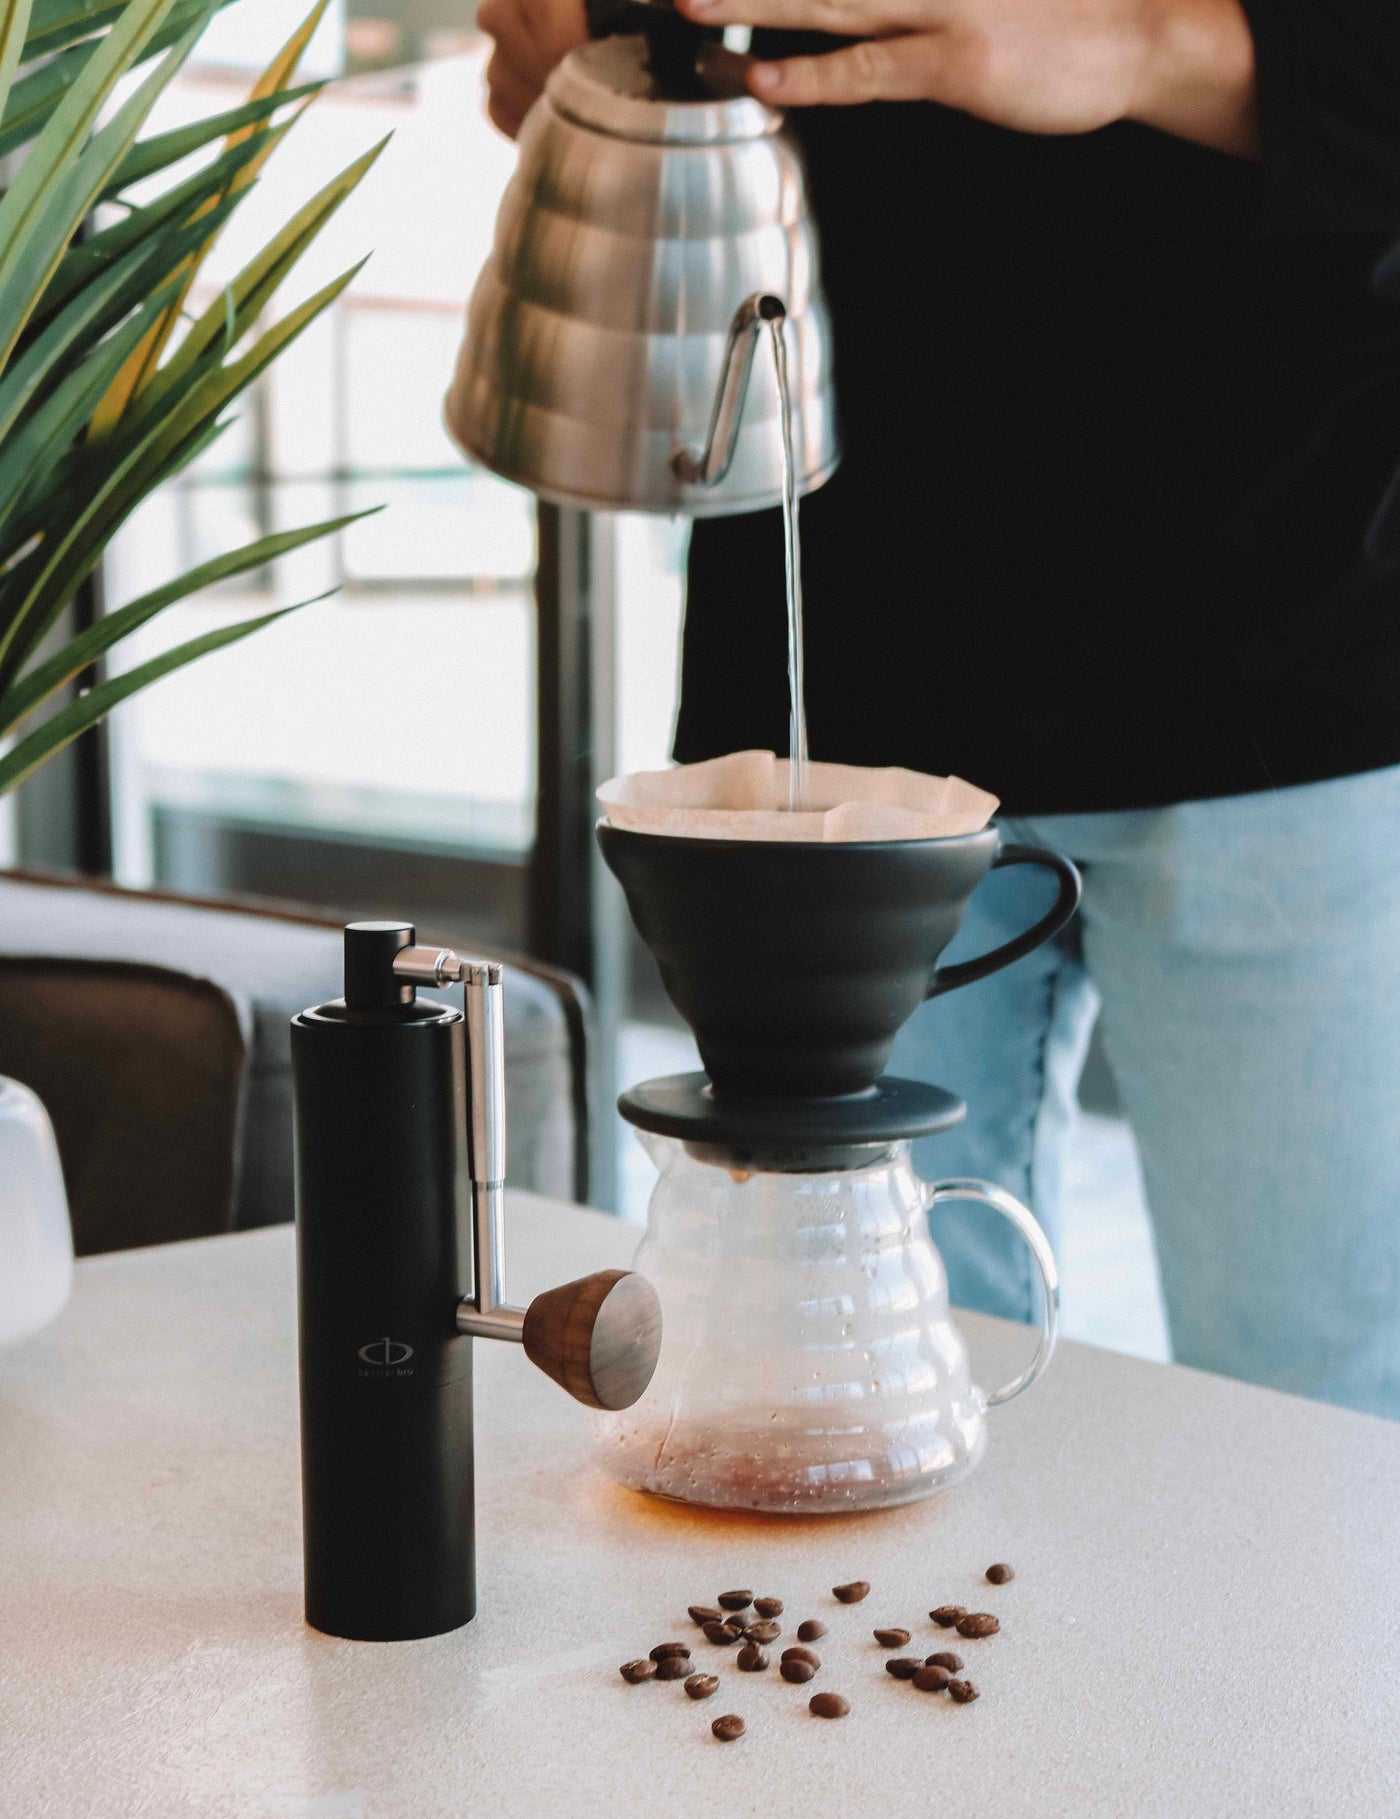 A Central Bru black anodized aluminum coffee grinder with silver hand and wood knob.  Man pouring water with a stainless steel gooseneck kettle in a v60 making a pour over coffee that is filtering into a glass coffee server